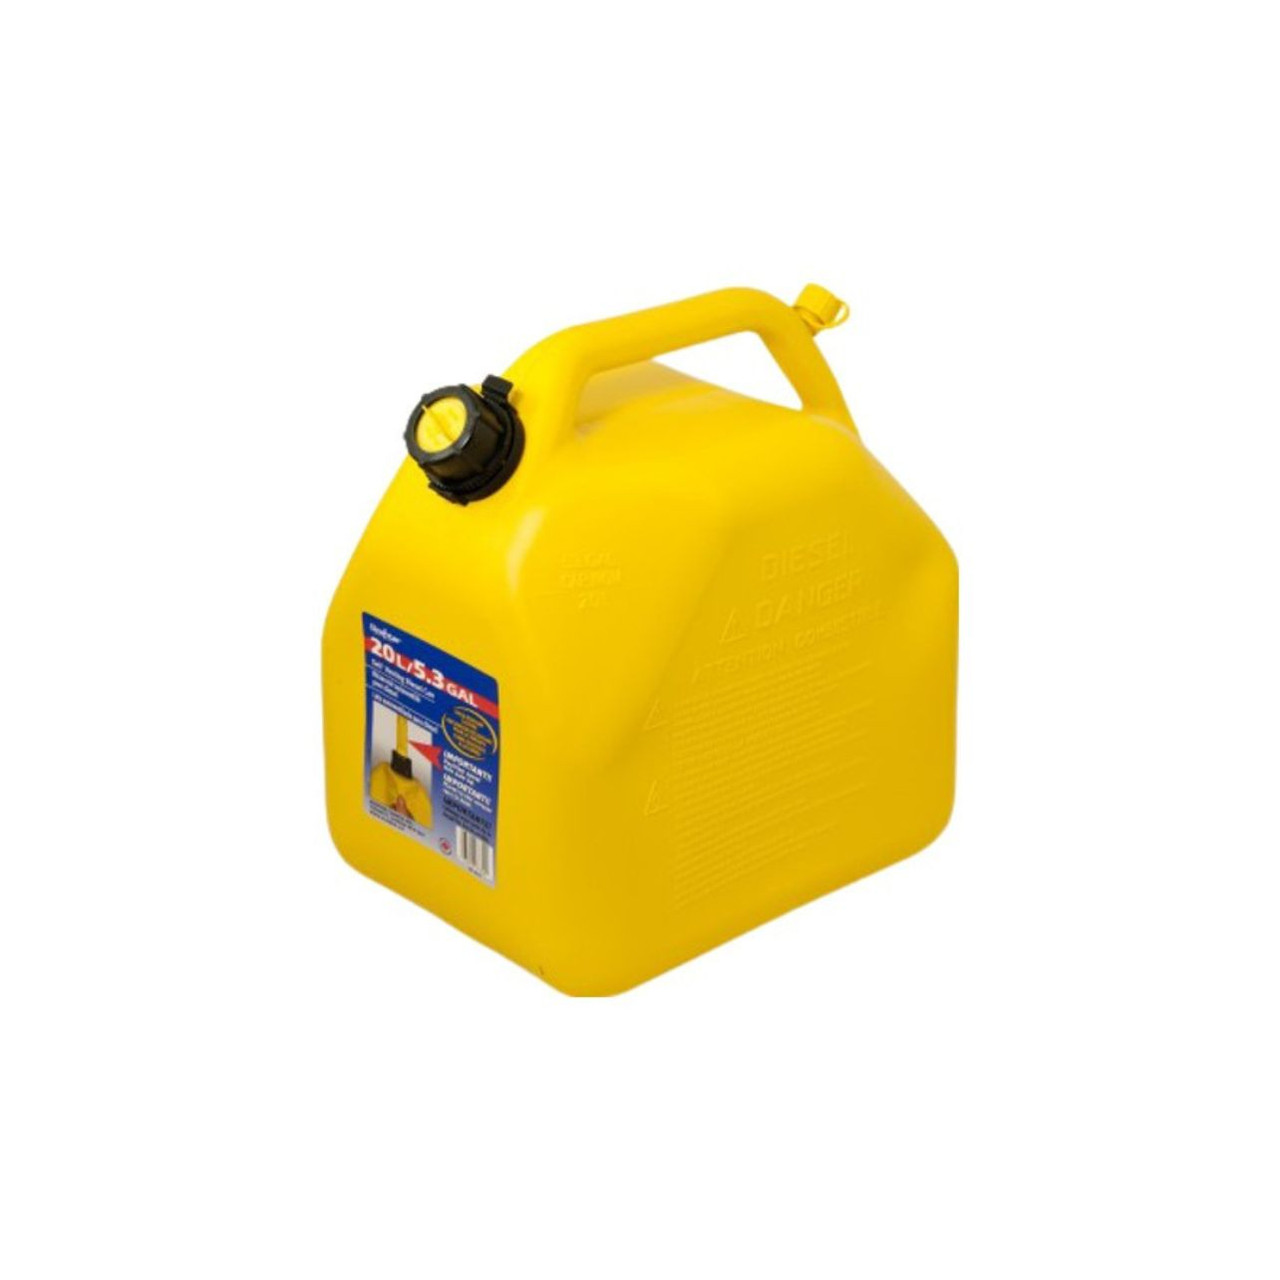 Scepter 20 Litre Jerry Can for Petrol transport to your boat (vent & spout).